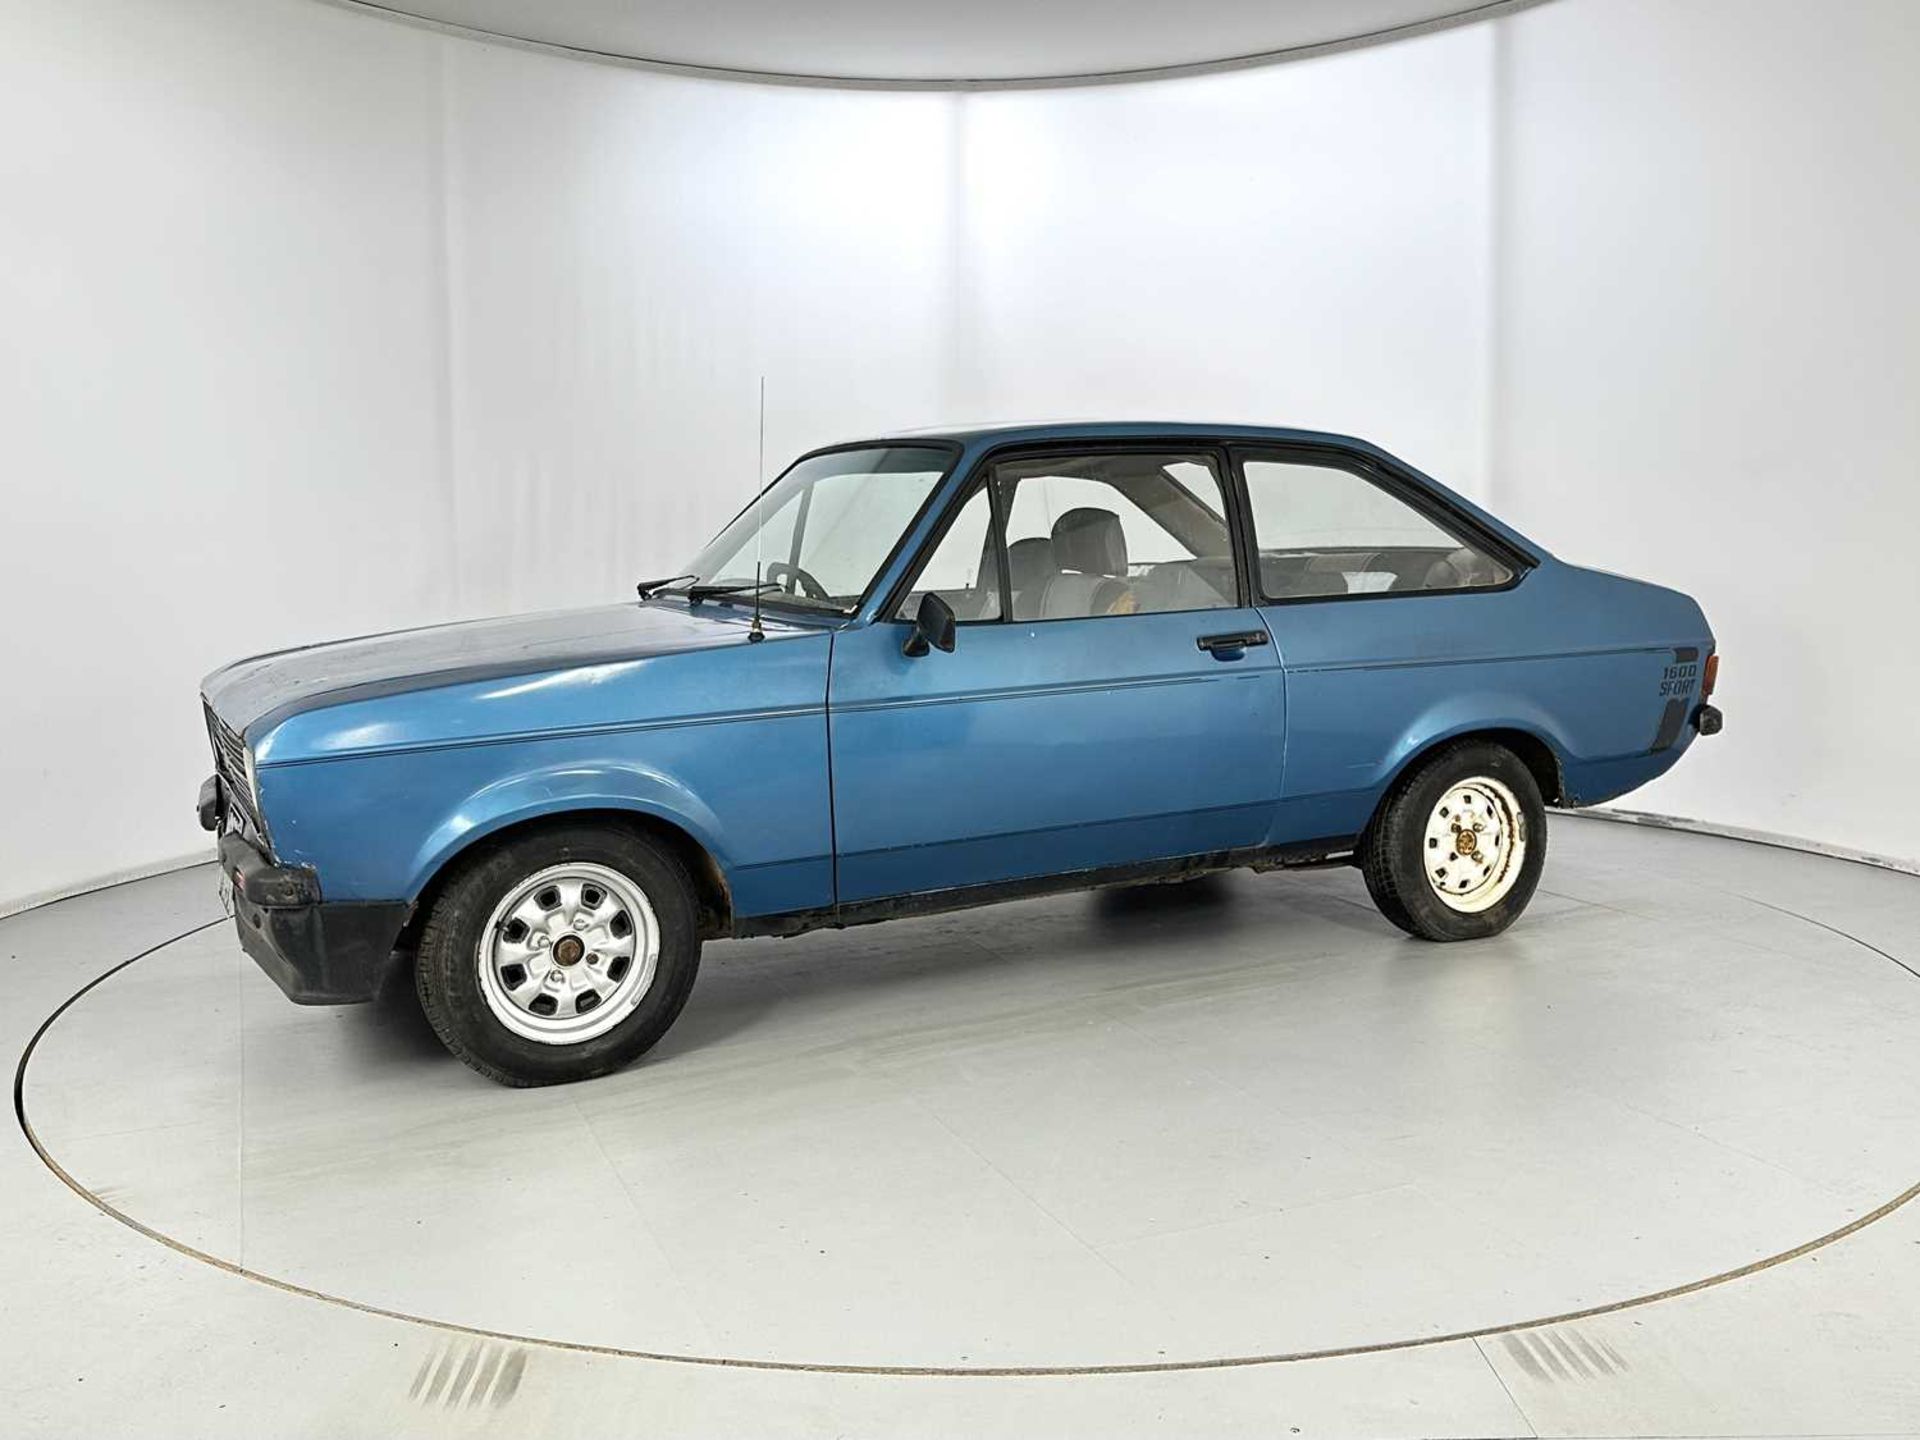 1979 Ford Escort 1600 Sport - Image 4 of 22